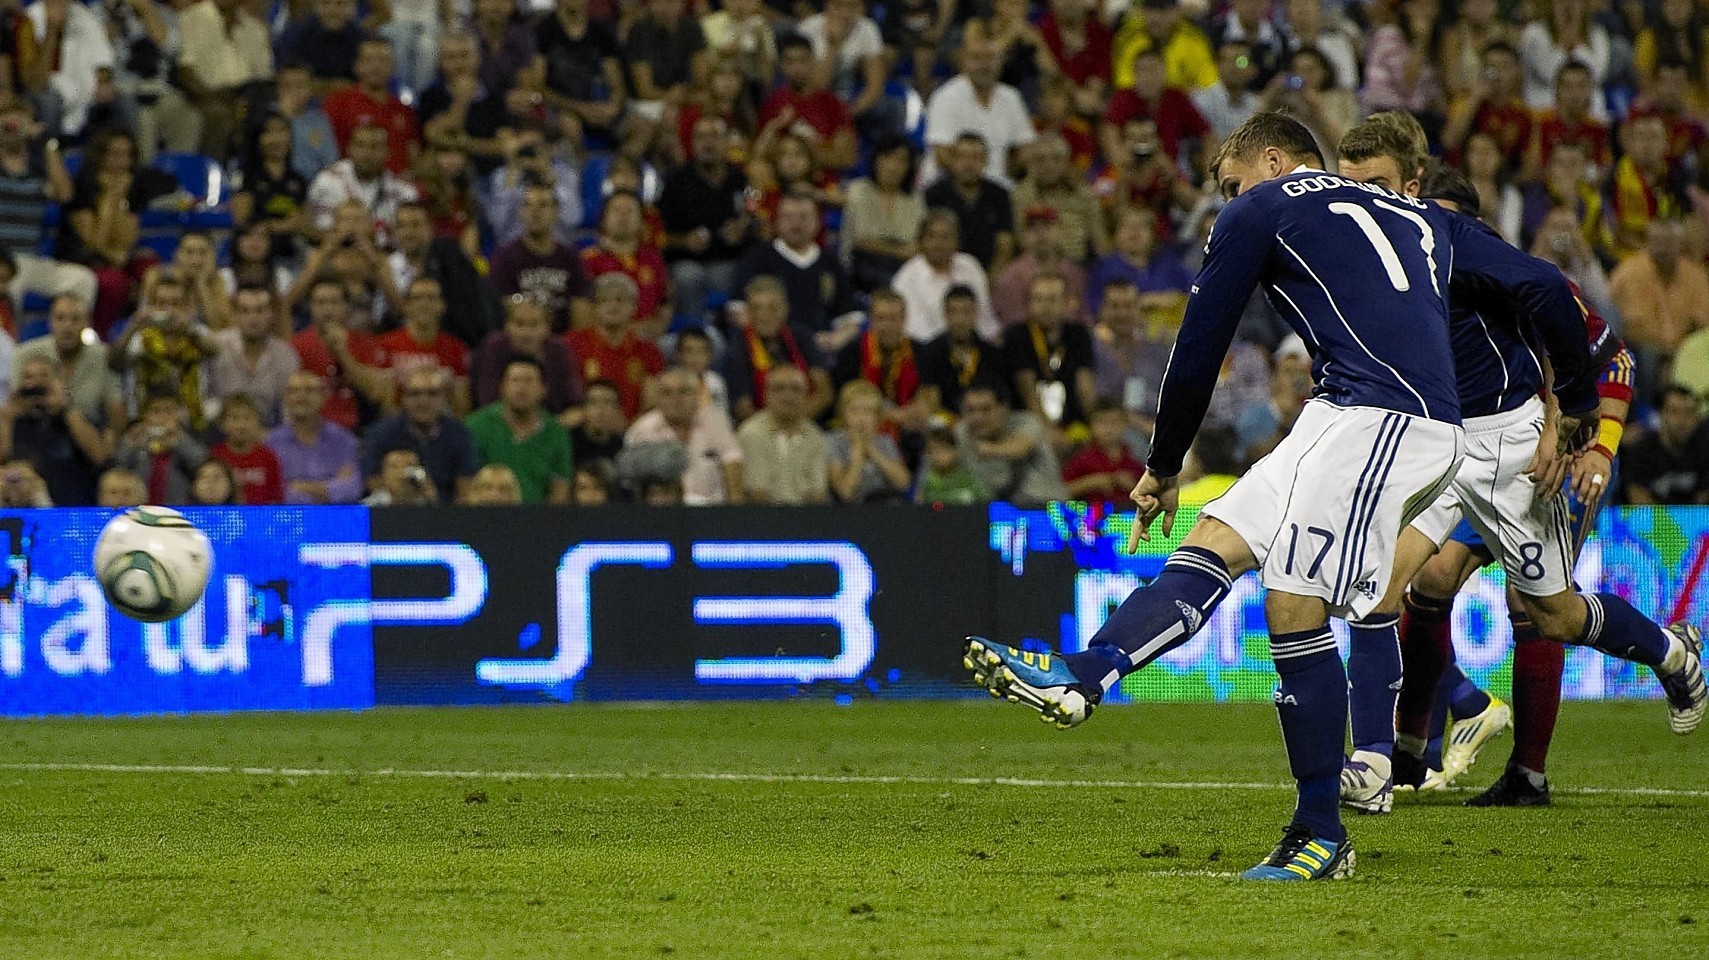 Goodwillie scores from the penalty spot against Spain